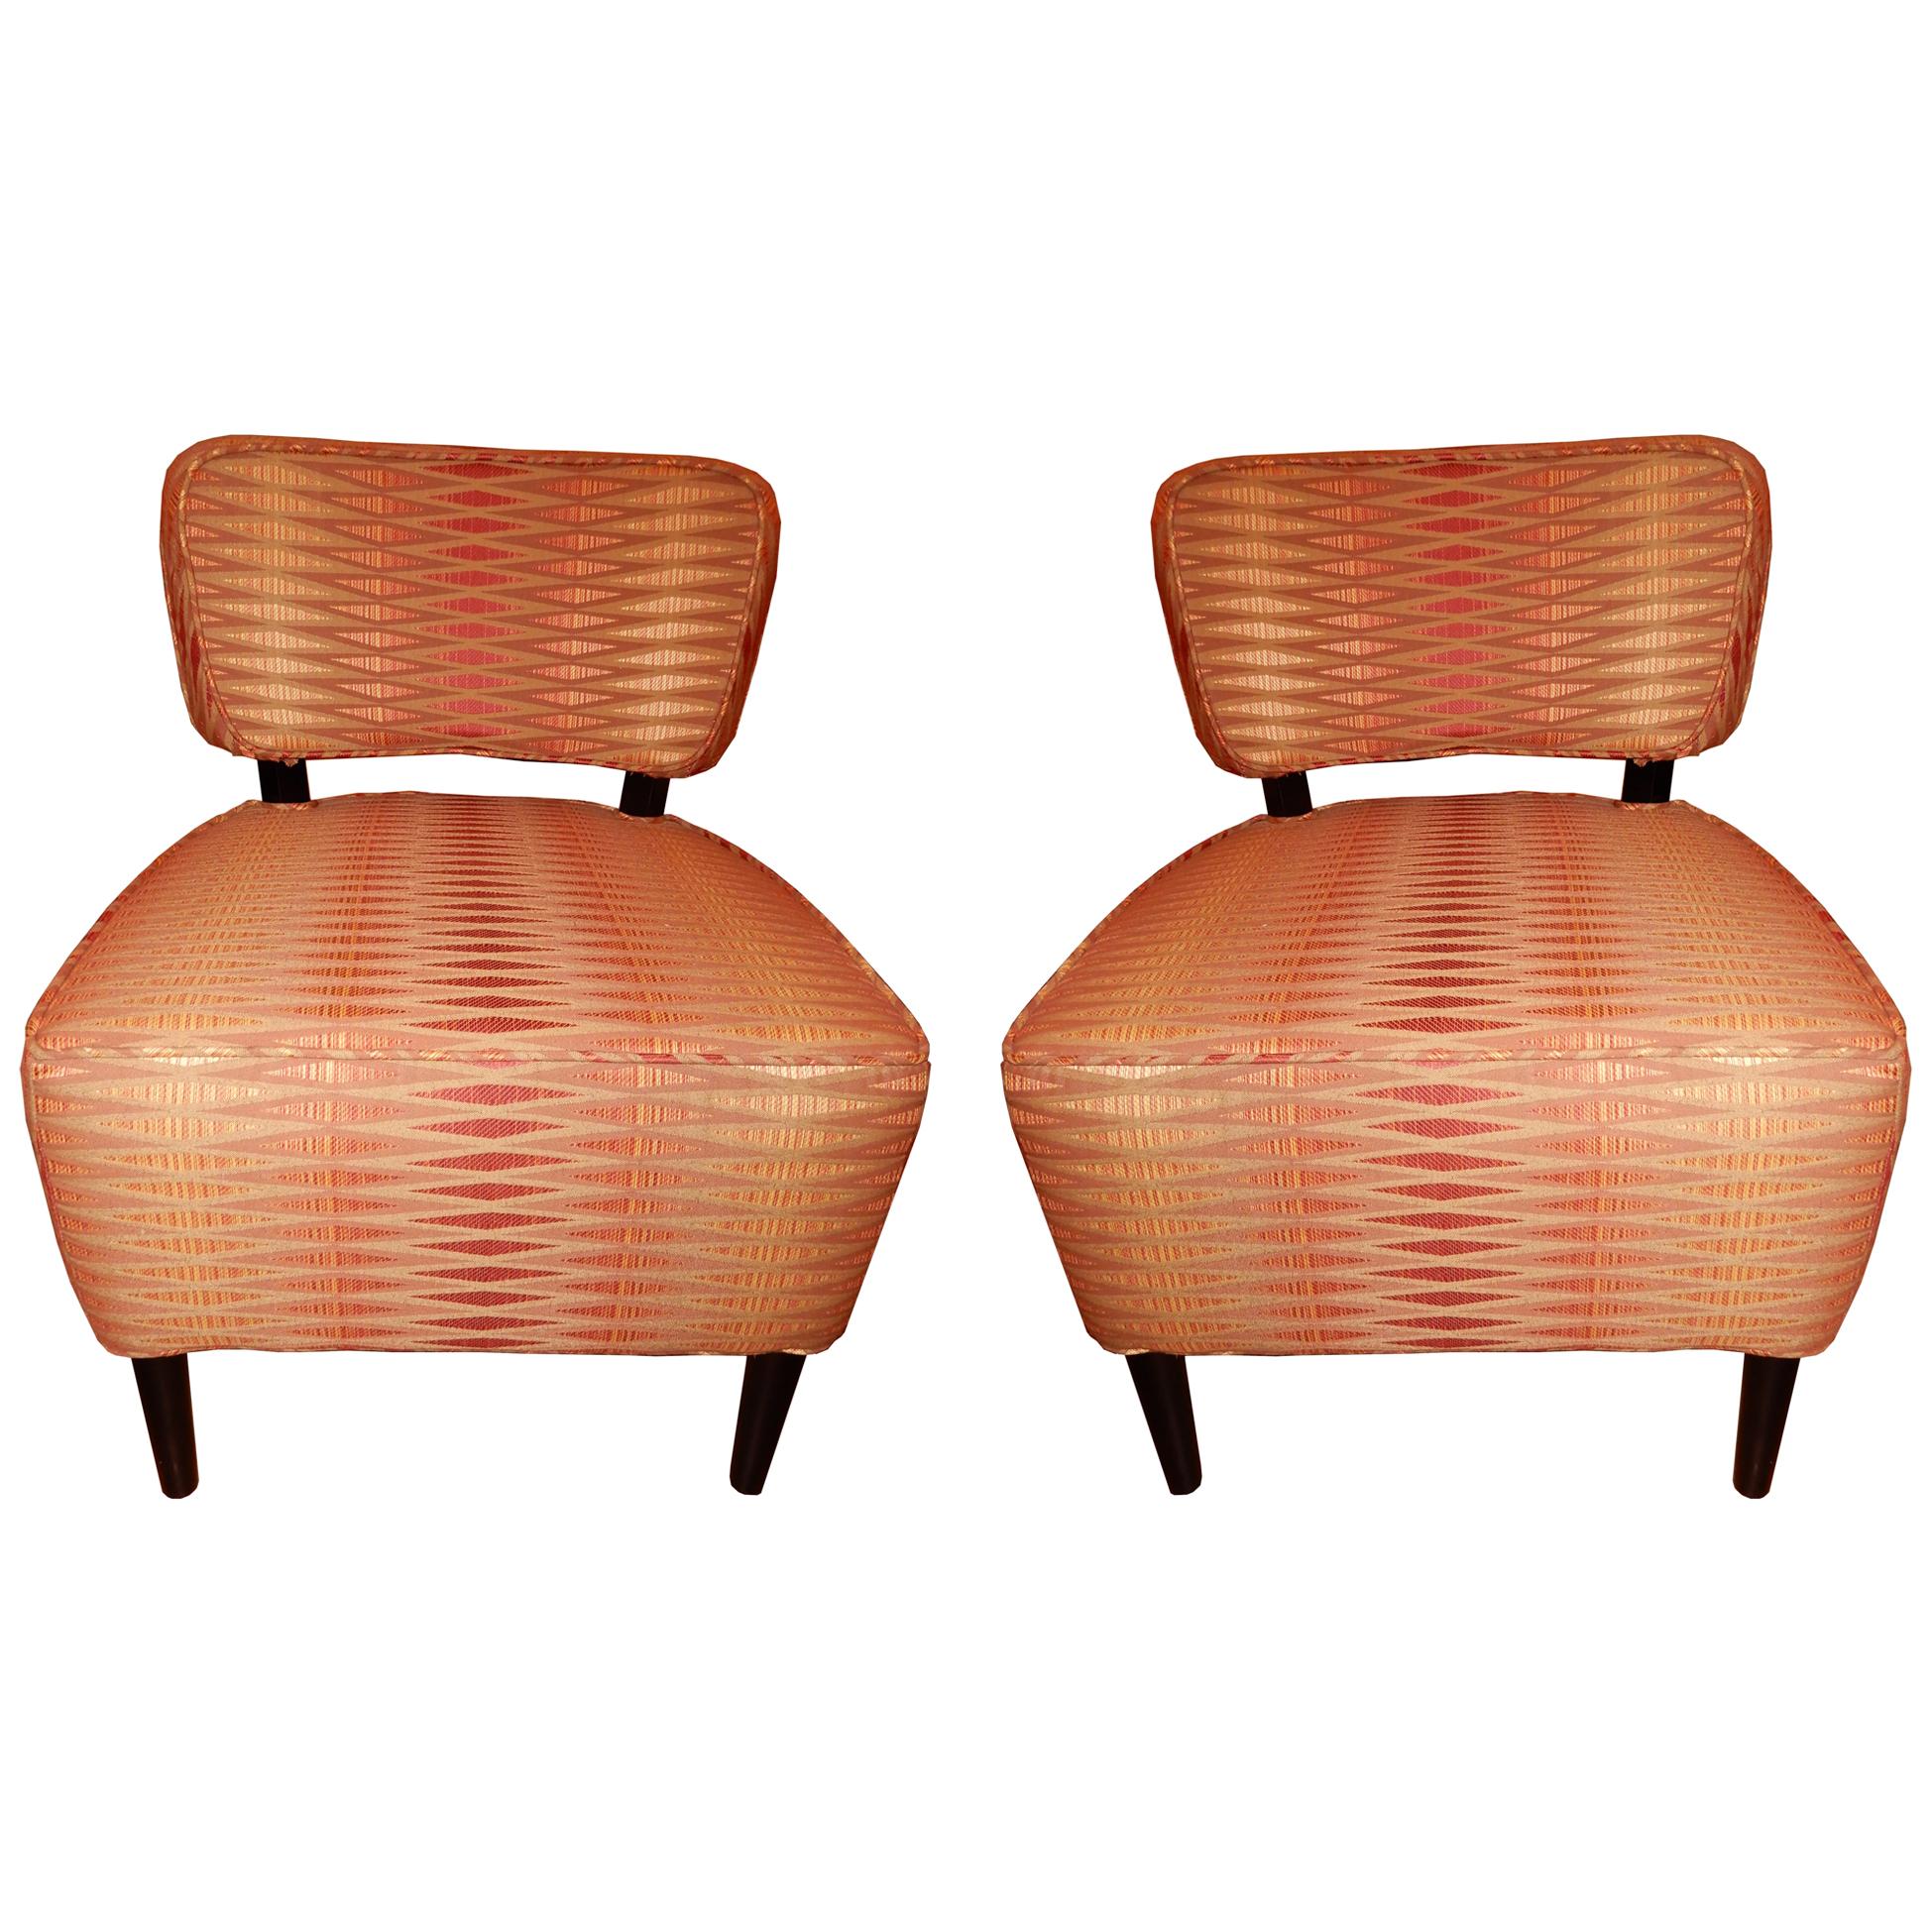 Pair of Cozy Mid-Century Modern Side Chairs